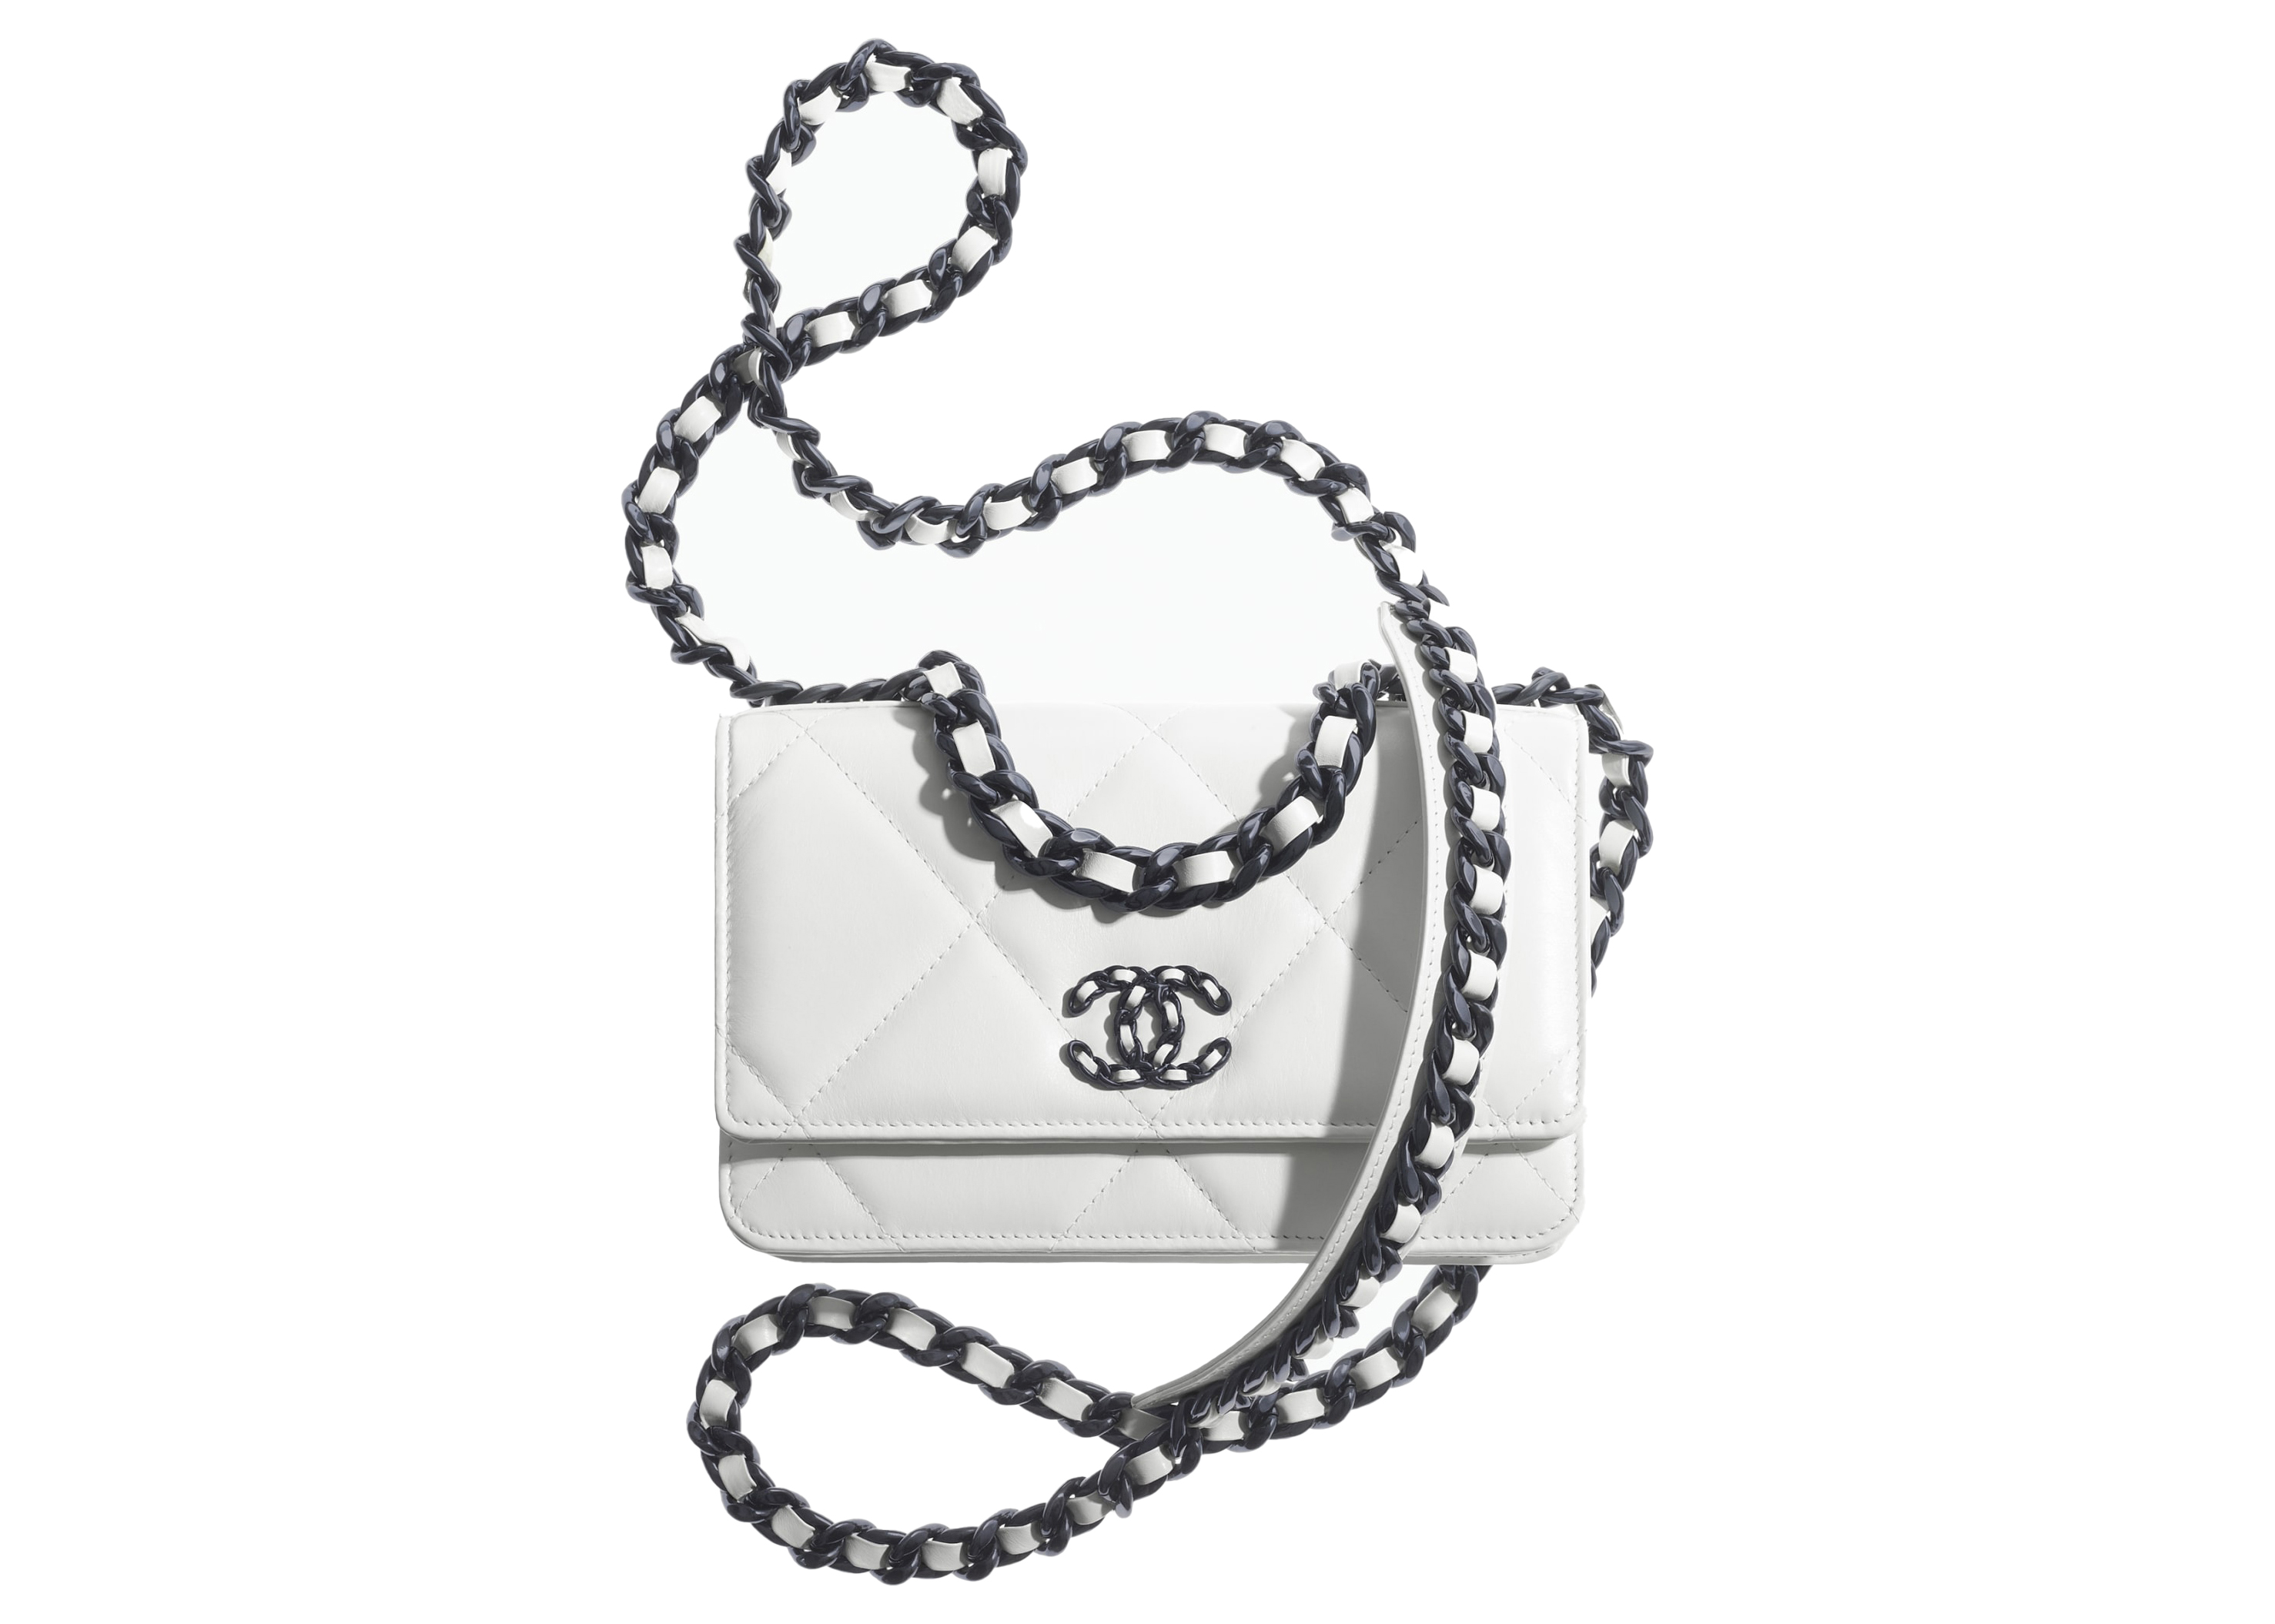 Wallet on chain chanel 19 leather handbag Chanel Black in Leather  23913579